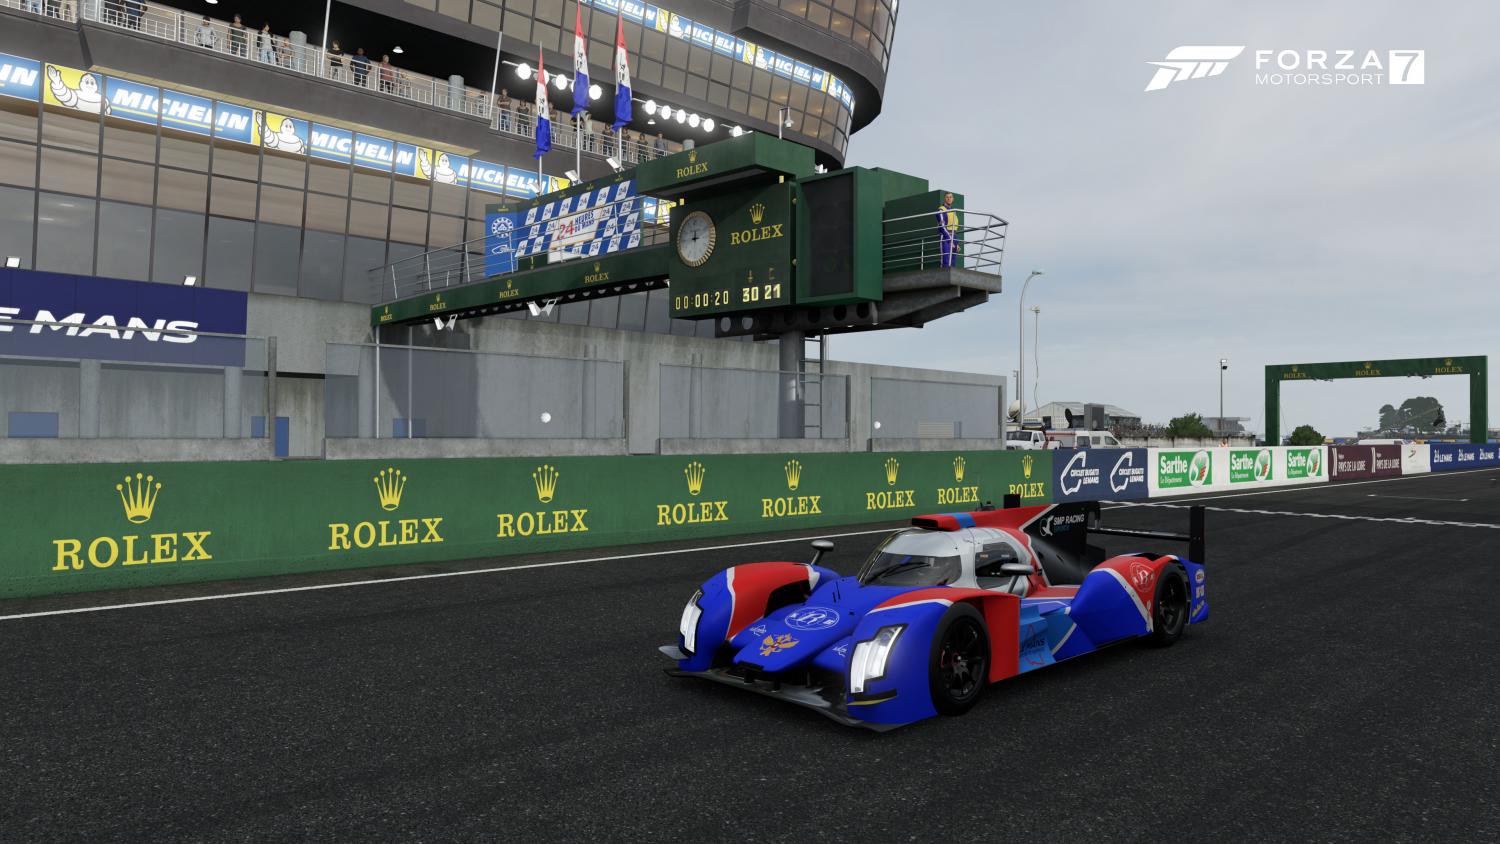 Smp Racing Ле ман. Smp Ле ман 2022. Автомобиль smp Racing. Le mans 24 hours smp.